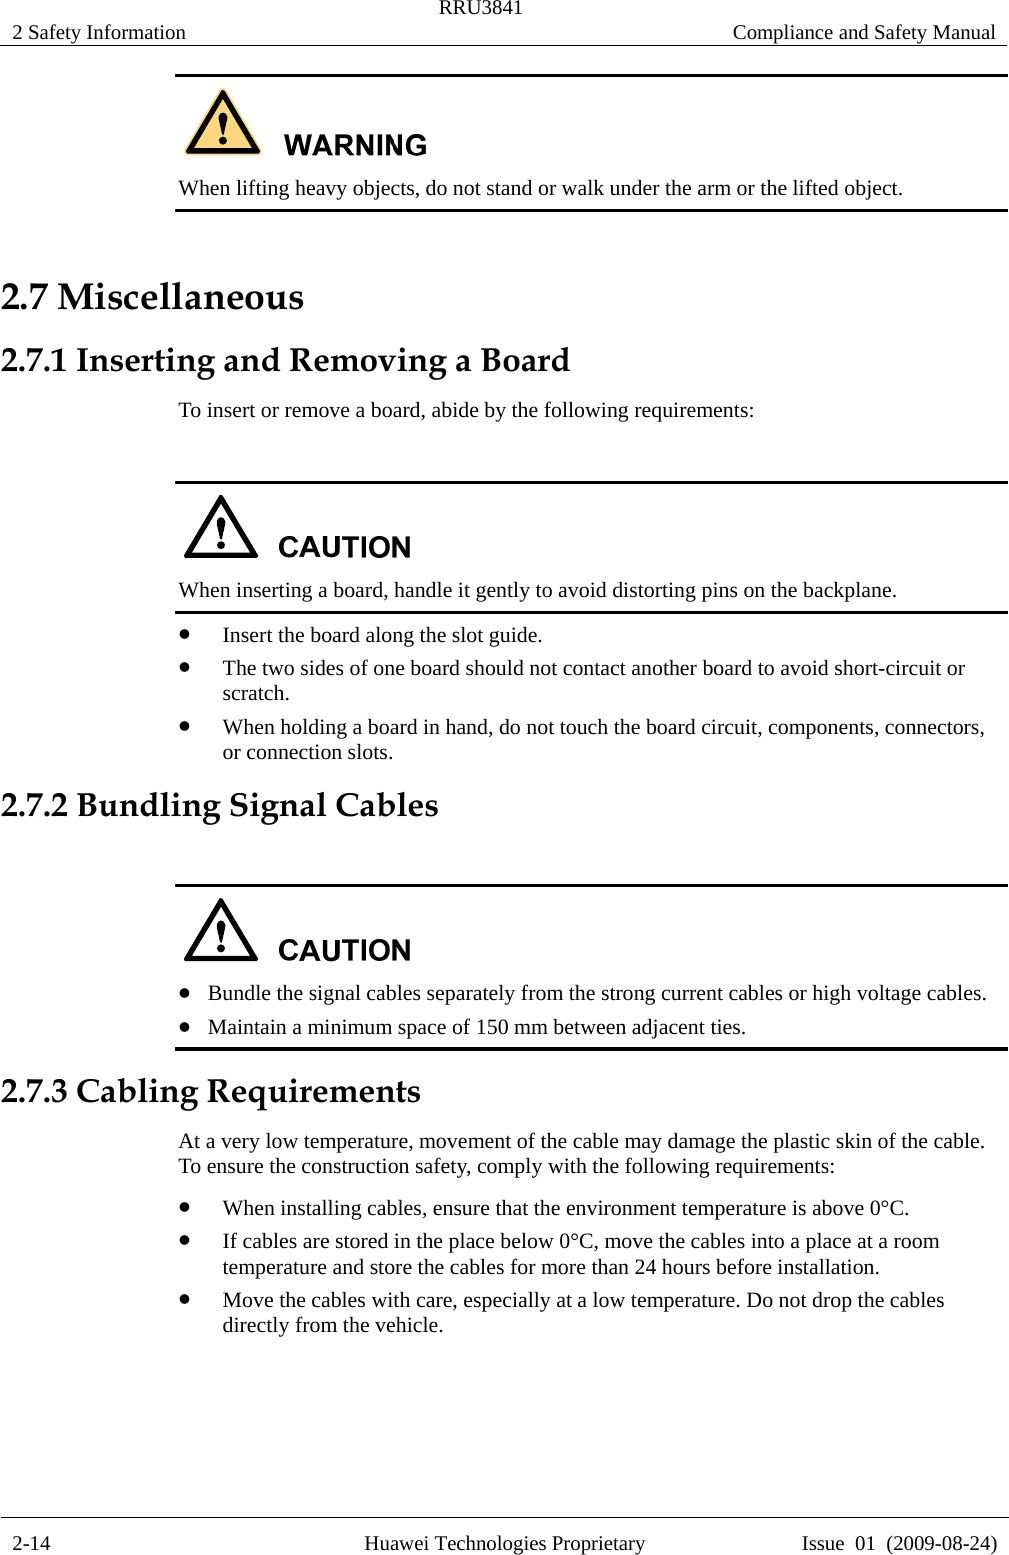 2 Safety Information  RRU3841  Compliance and Safety Manual  2-14  Huawei Technologies Proprietary  Issue  01  (2009-08-24)  When lifting heavy objects, do not stand or walk under the arm or the lifted object. 2.7 Miscellaneous 2.7.1 Inserting and Removing a Board To insert or remove a board, abide by the following requirements:   When inserting a board, handle it gently to avoid distorting pins on the backplane. z Insert the board along the slot guide. z The two sides of one board should not contact another board to avoid short-circuit or scratch. z When holding a board in hand, do not touch the board circuit, components, connectors, or connection slots. 2.7.2 Bundling Signal Cables   z Bundle the signal cables separately from the strong current cables or high voltage cables. z Maintain a minimum space of 150 mm between adjacent ties. 2.7.3 Cabling Requirements At a very low temperature, movement of the cable may damage the plastic skin of the cable. To ensure the construction safety, comply with the following requirements: z When installing cables, ensure that the environment temperature is above 0°C. z If cables are stored in the place below 0°C, move the cables into a place at a room temperature and store the cables for more than 24 hours before installation. z Move the cables with care, especially at a low temperature. Do not drop the cables directly from the vehicle.  